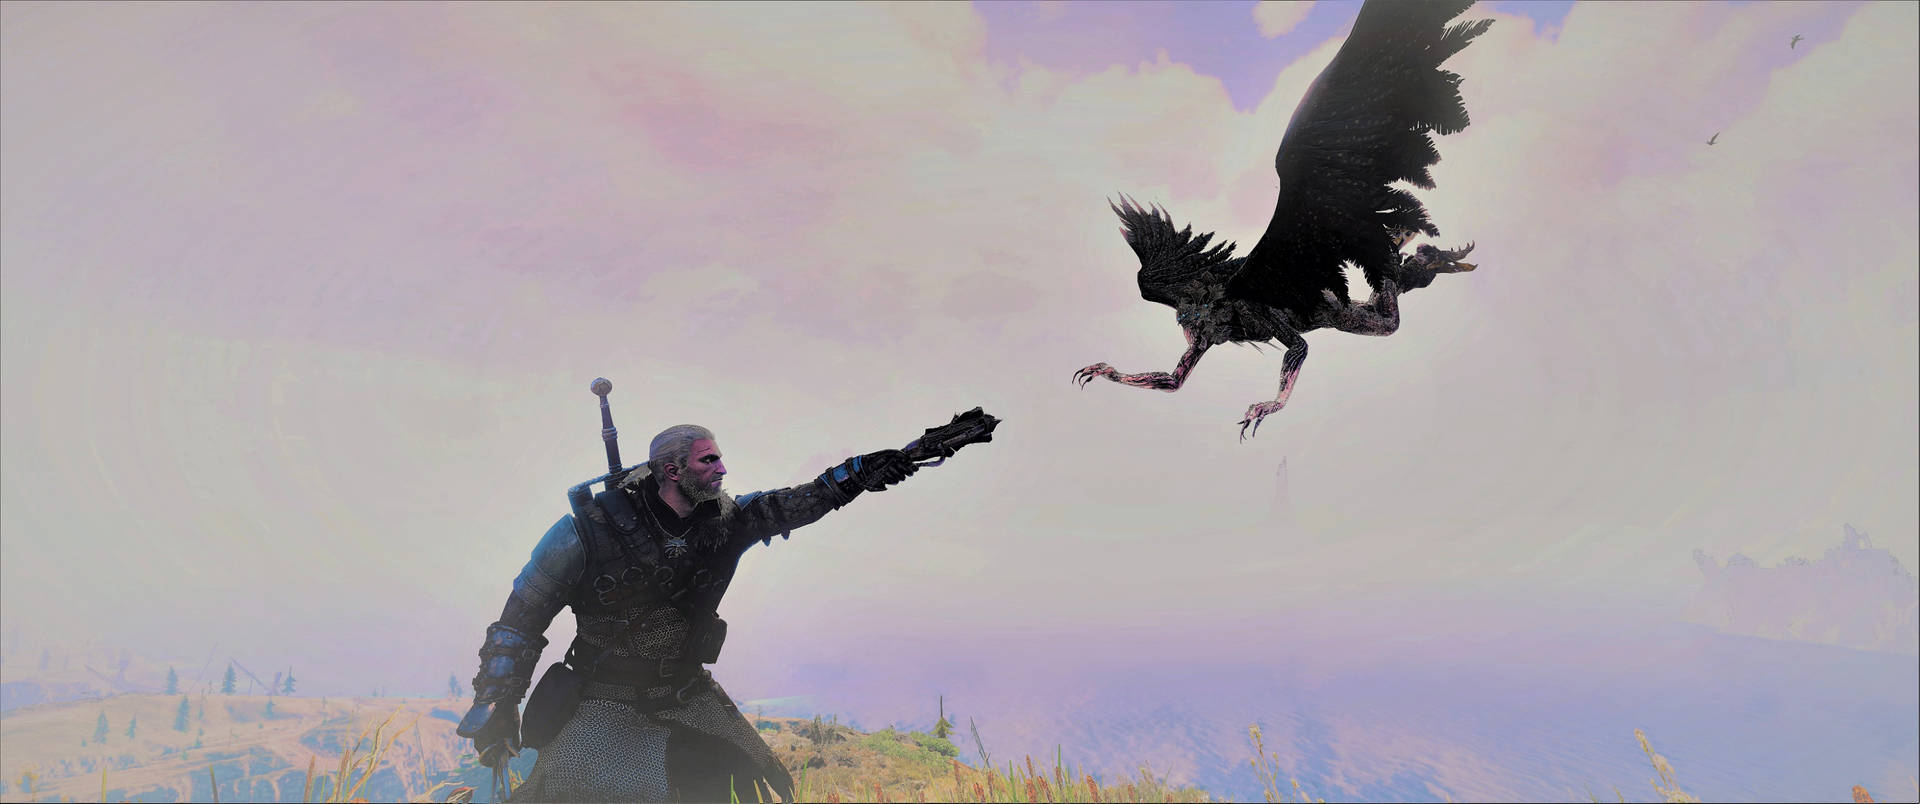 Taking Flight! Geralt Prepares for Attack From a Griffin in The Witcher 3 Wild Hunt Wallpaper